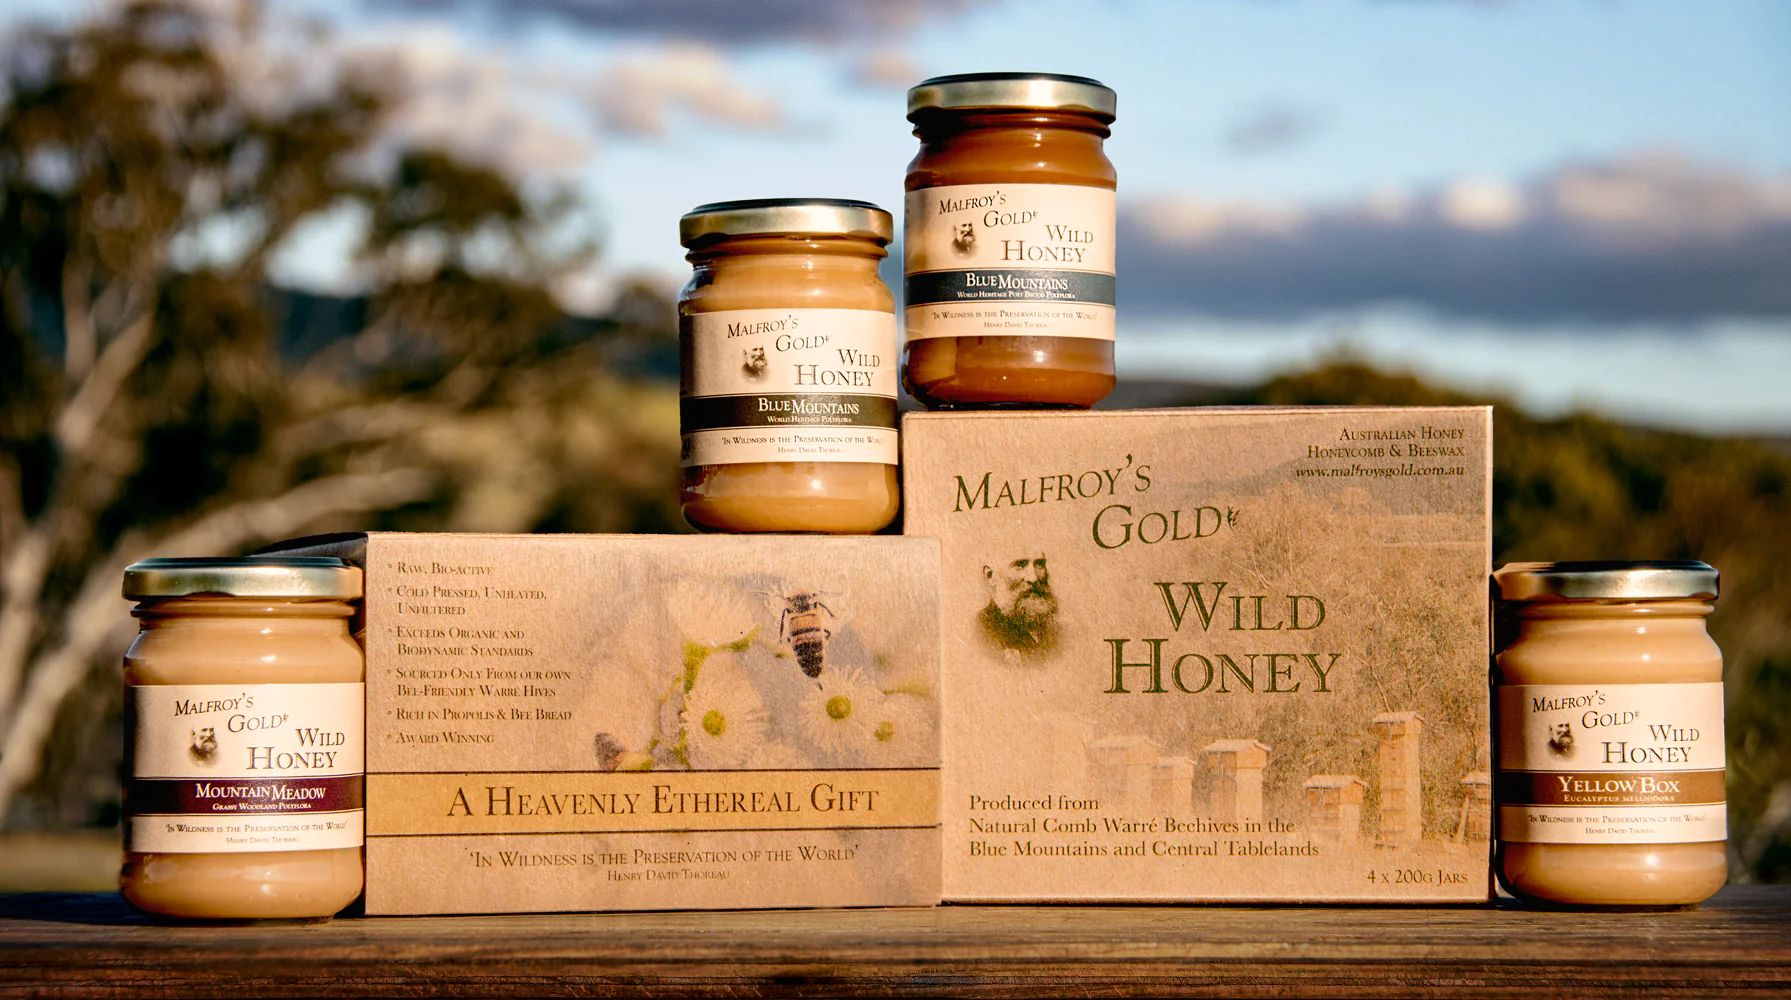 Malfroy's Gold Wild Honey 4 x 200g Gift Pack Mixed Regions